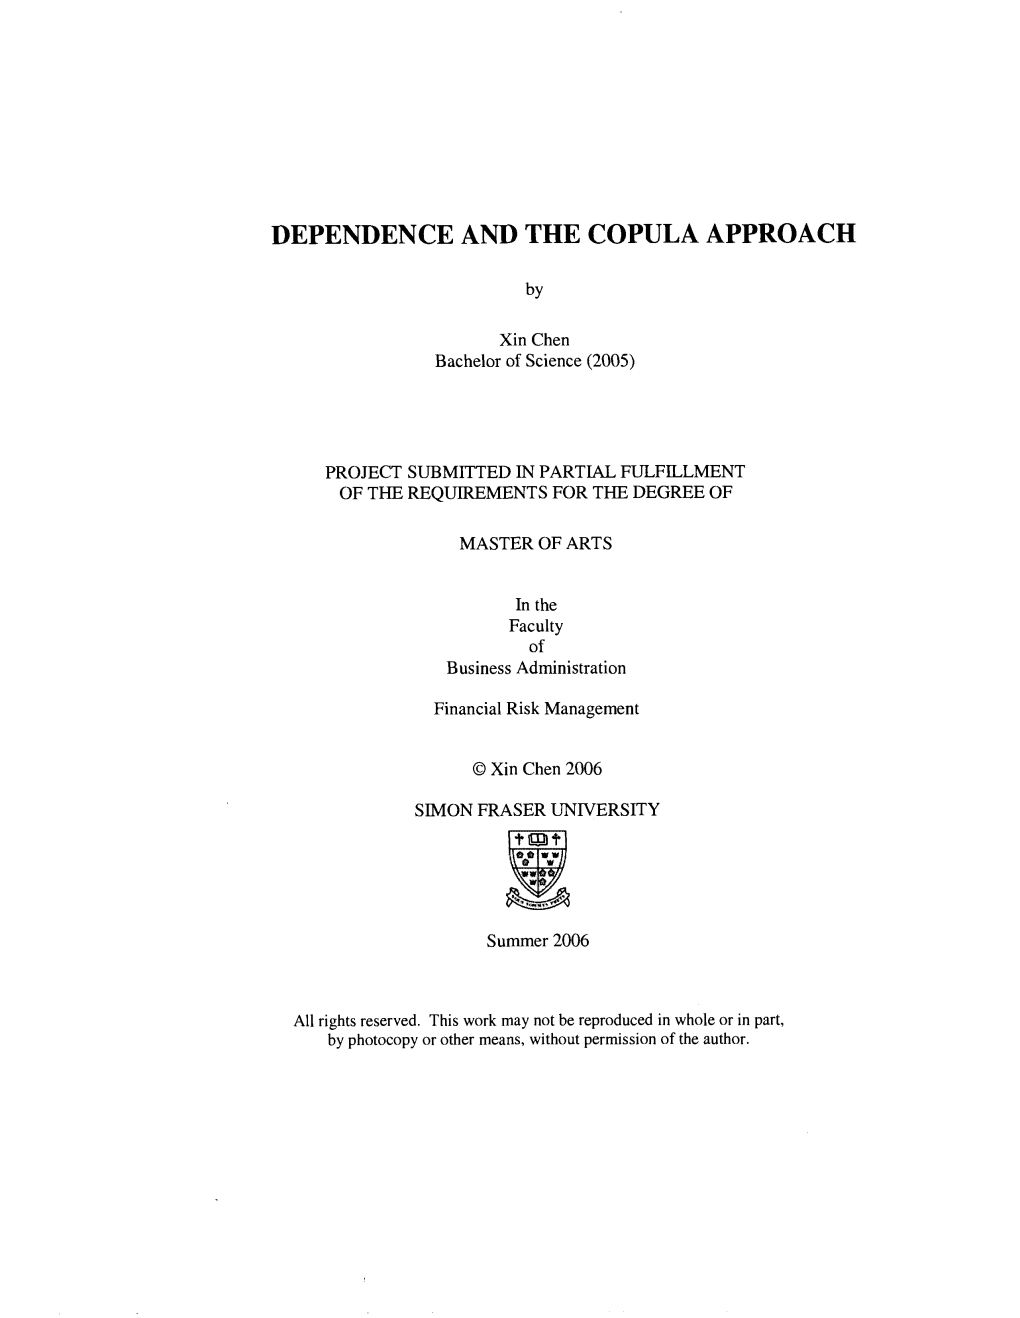 Dependence and the Copula Approach